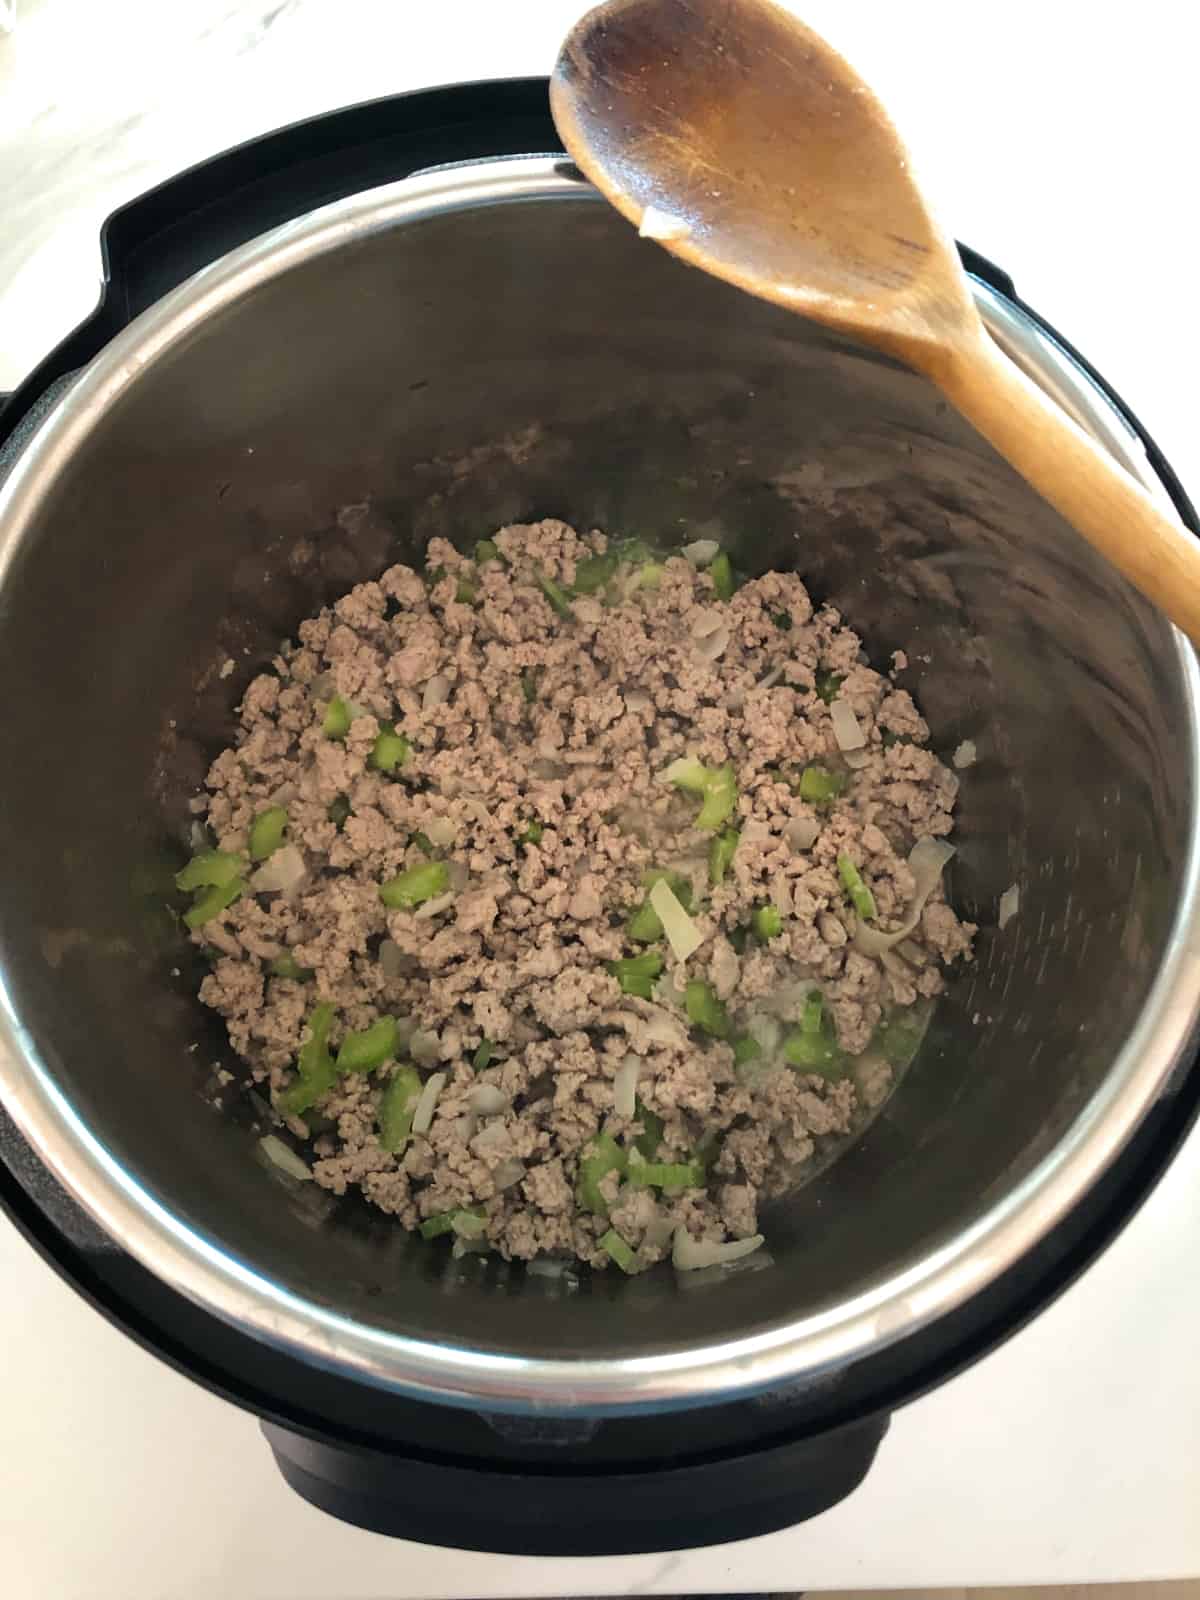 Browning ground turkey, celery, onions in InstantPot